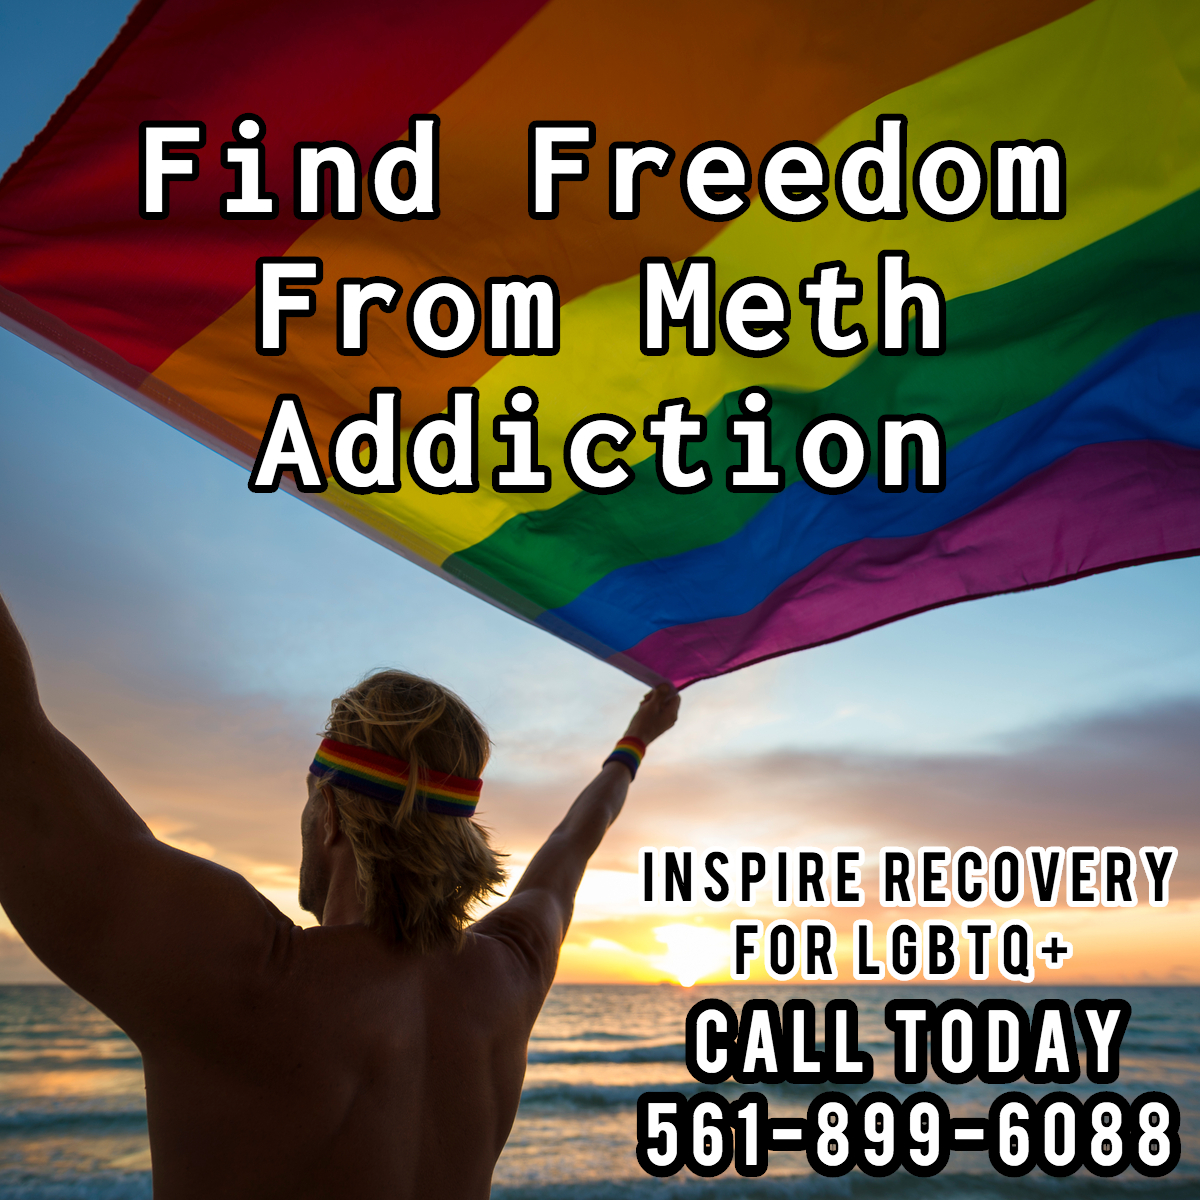 Find freedom from meth addiction at Inspire Recovery LGBT addiction rehab.